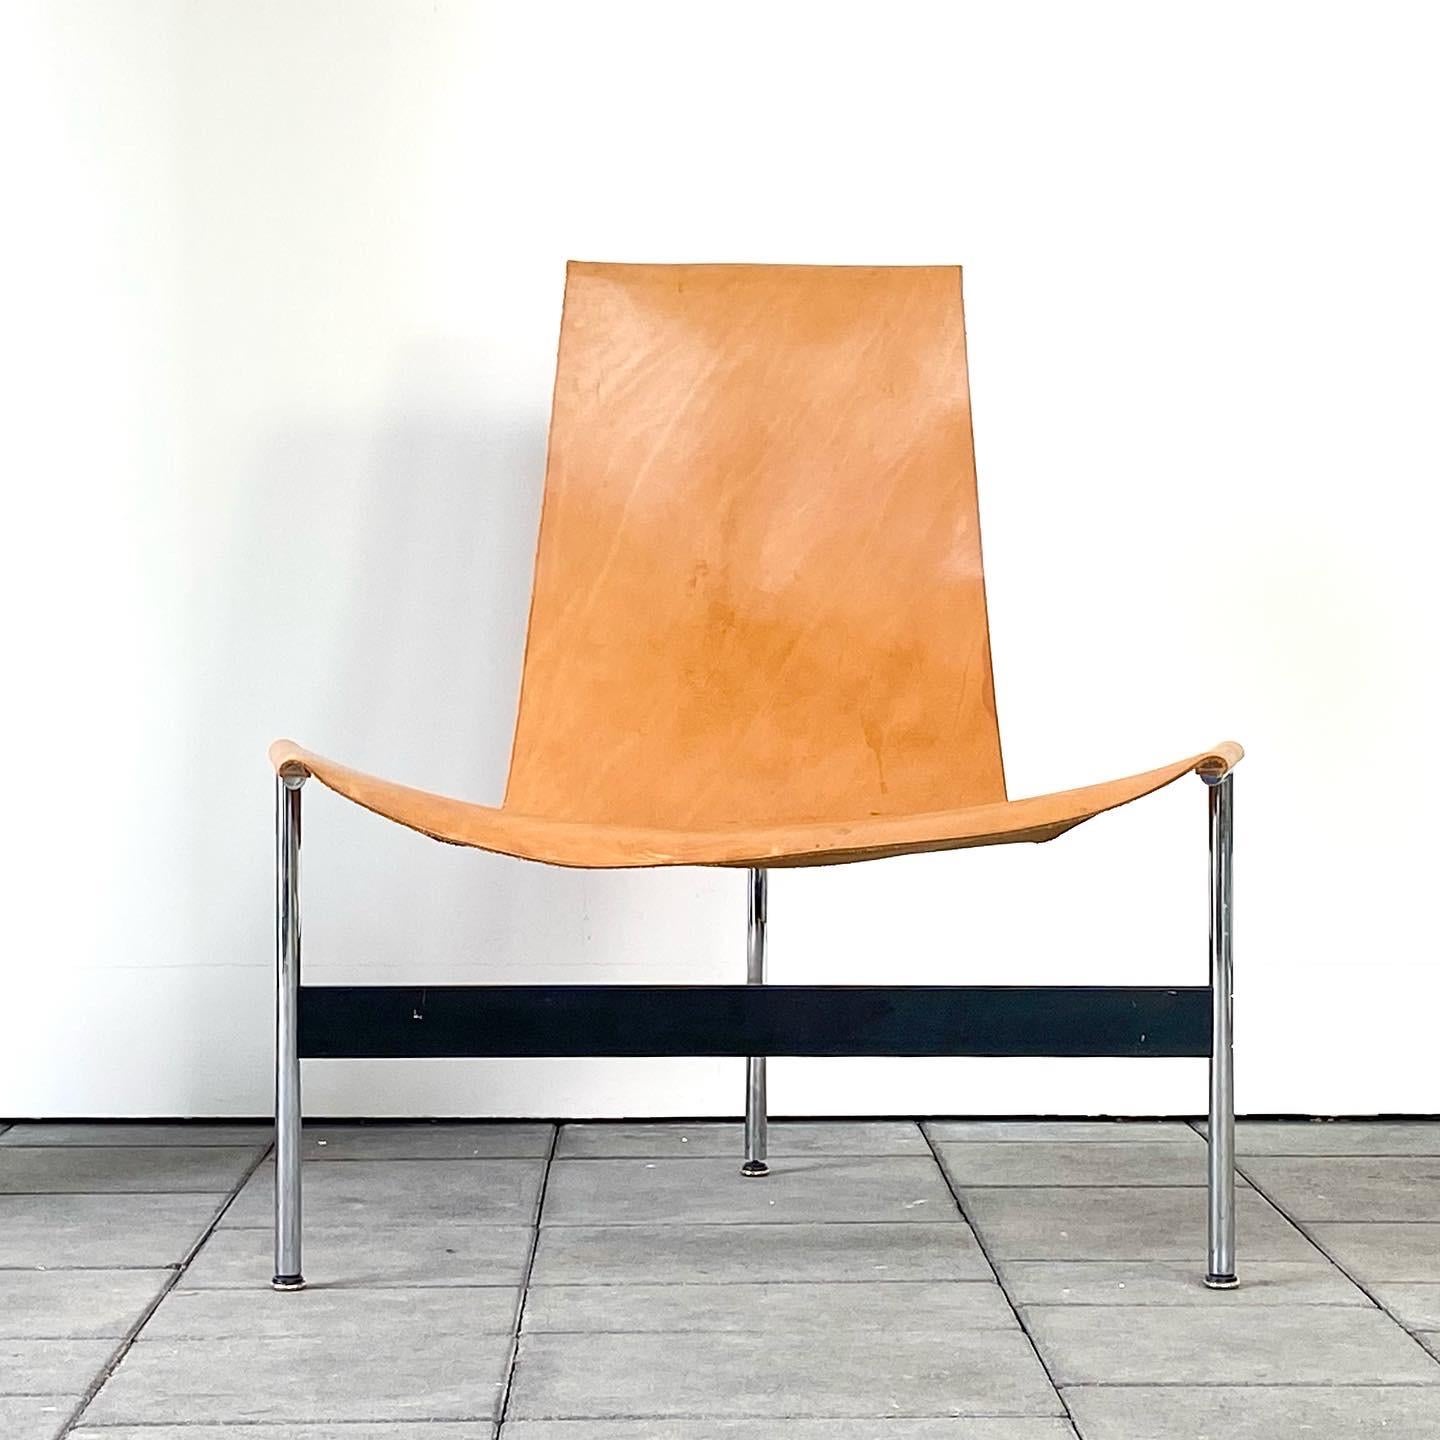 3LC Laverne International T lounge chair designed by William Katavolos, Ross Litell & David Kelley in the early 1950ies.

Hardly any other chair konjugates one particular shape comparable to the T-Chair: three T-legs, assembled with a T-cross